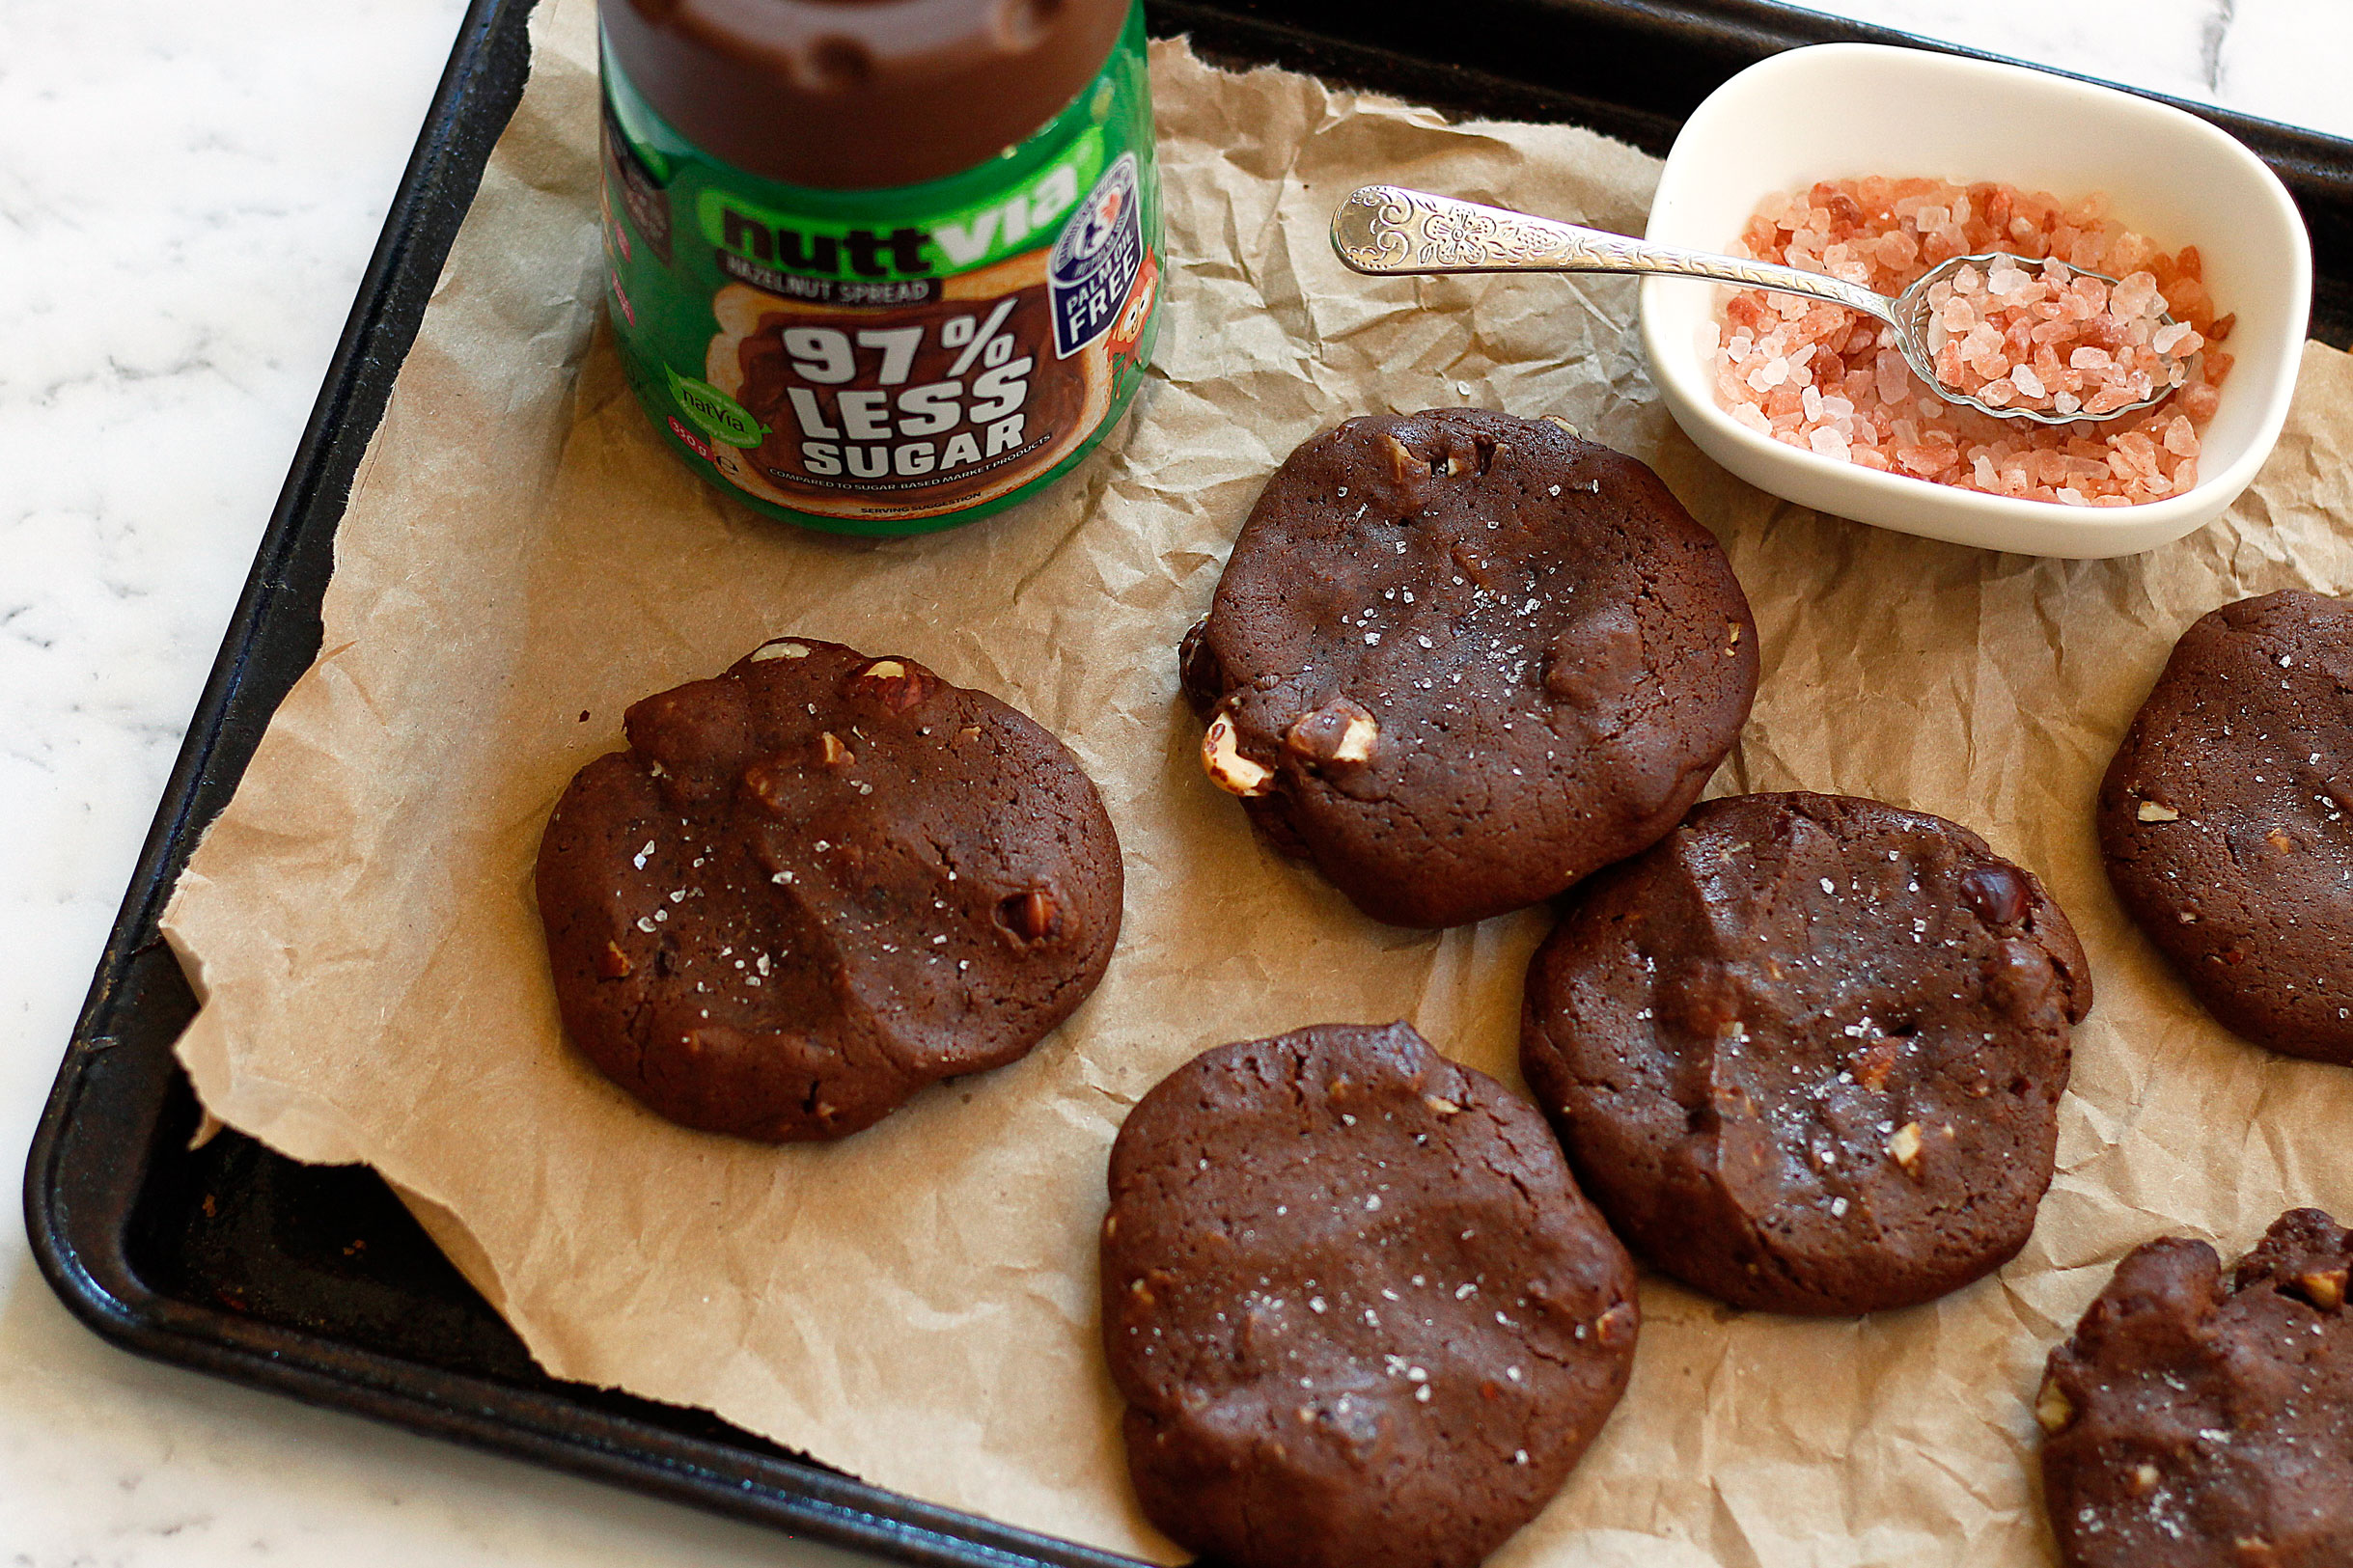 A jar of choc hazelnut spread and cookies on a tray